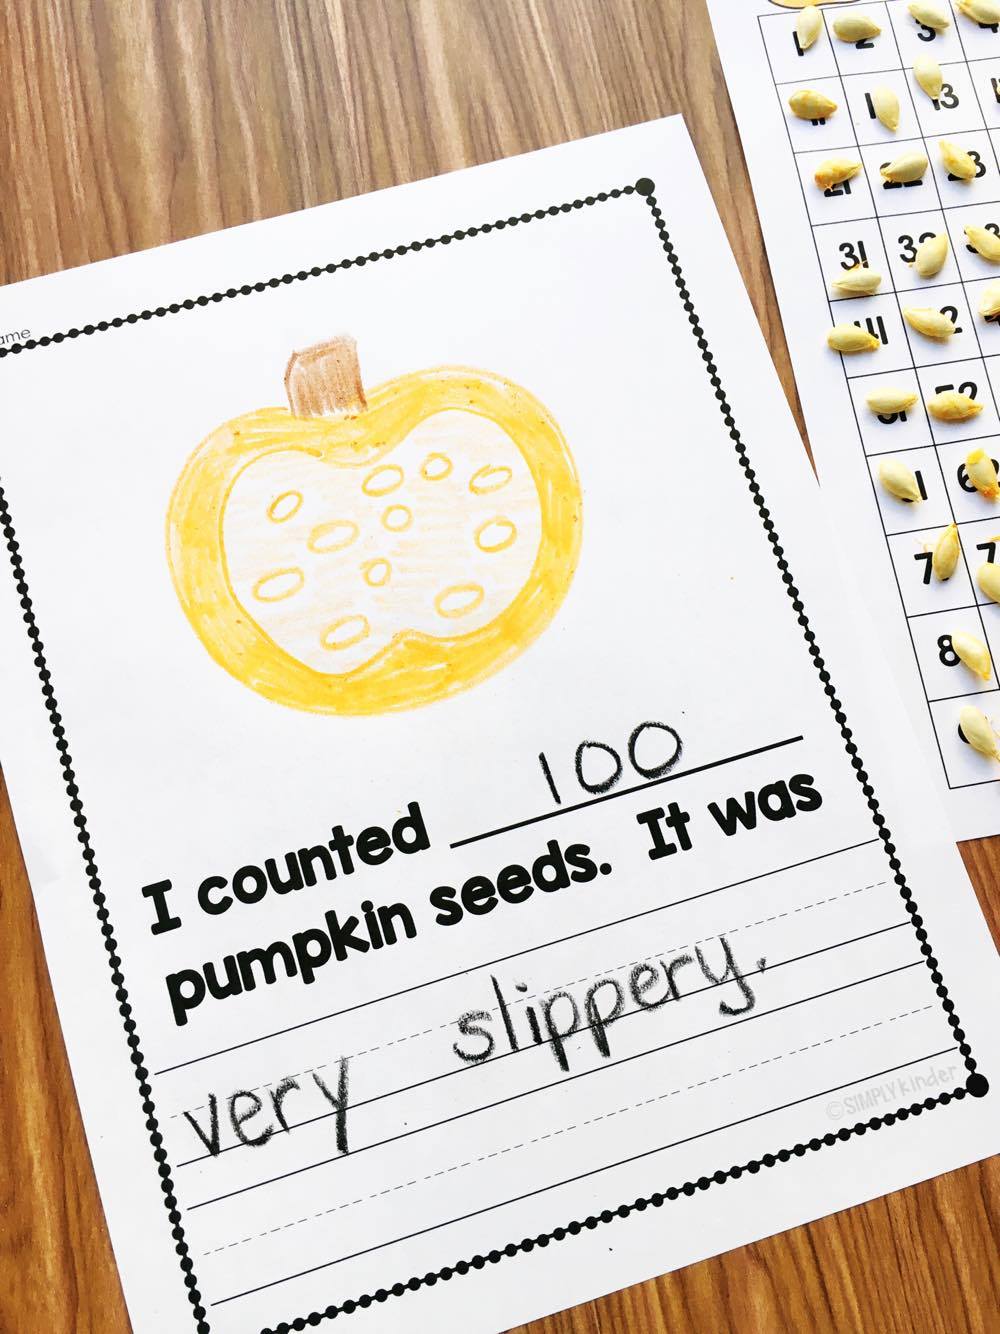 Use a hundreds chart to help students count pumpkin seeds.